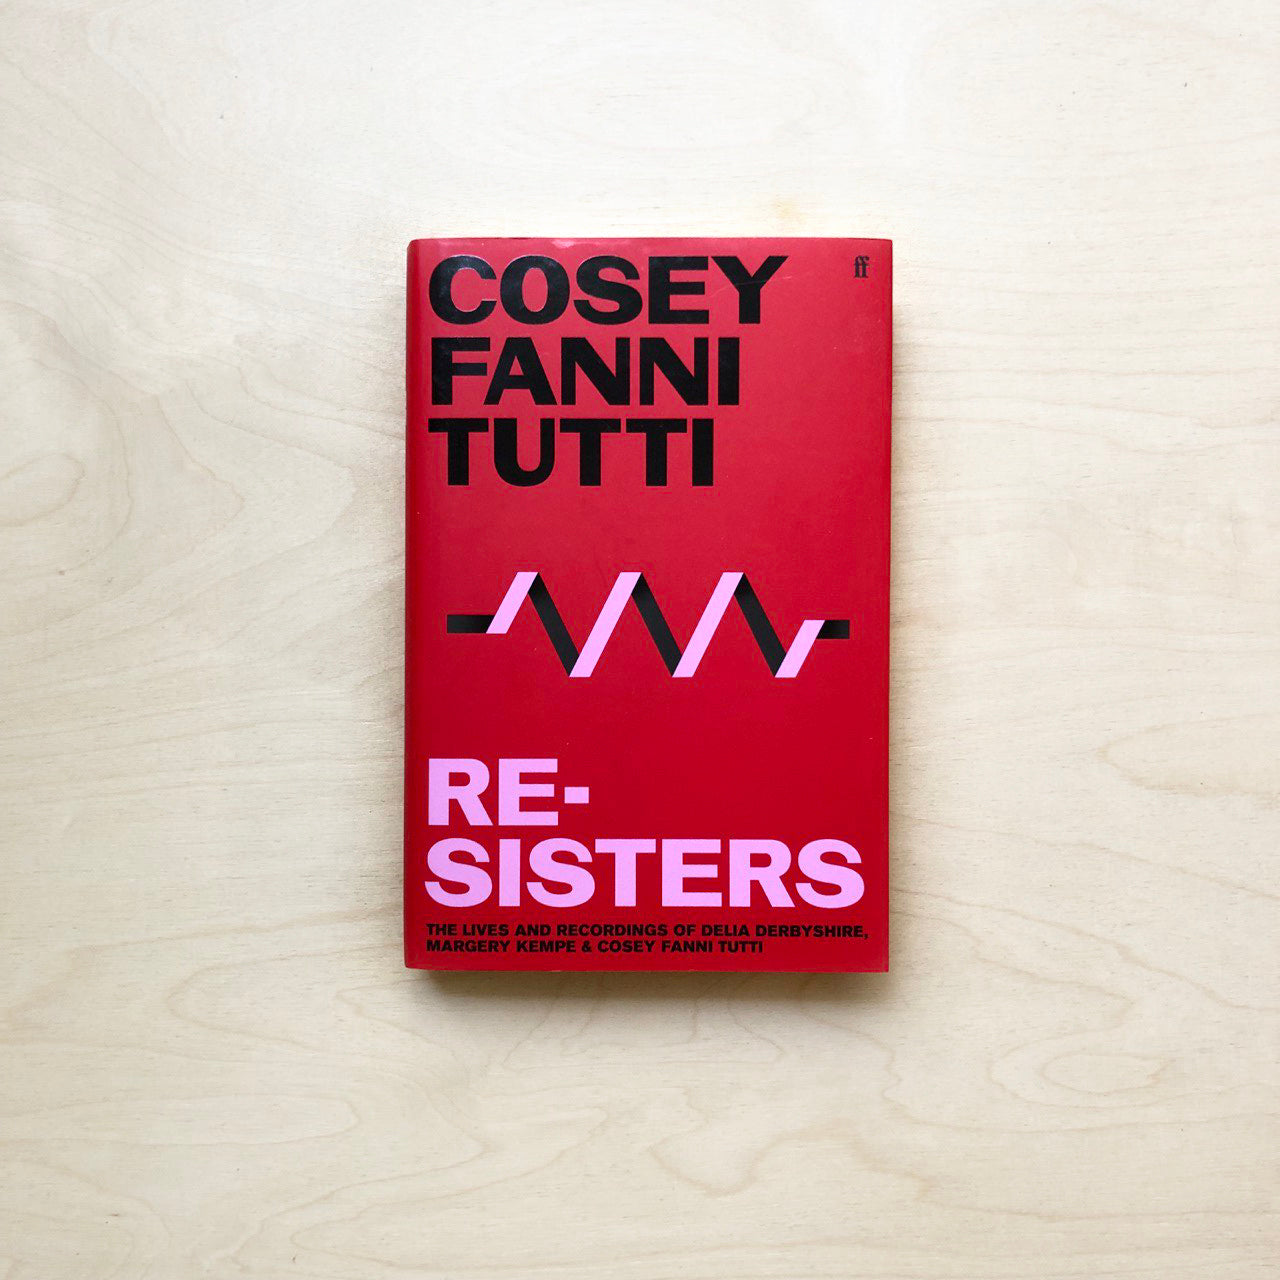 Re-Sisters: The Lives and Recordings of Delia Derbyshire, Margery Kempe & Cosey Fanni Tutti